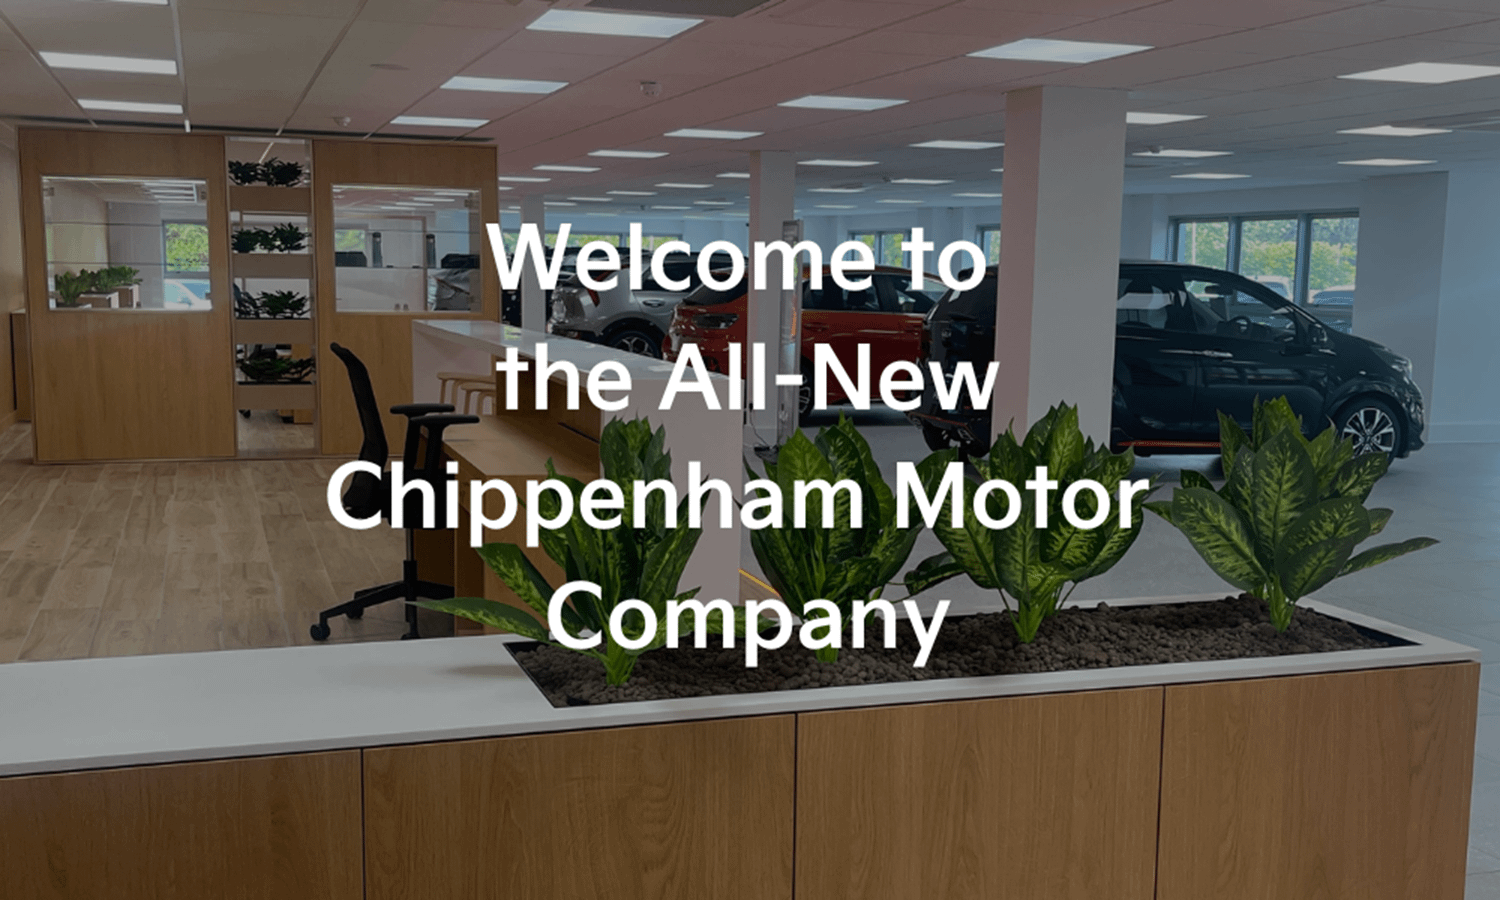 Welcome to the All-New Chippenham Motor Company